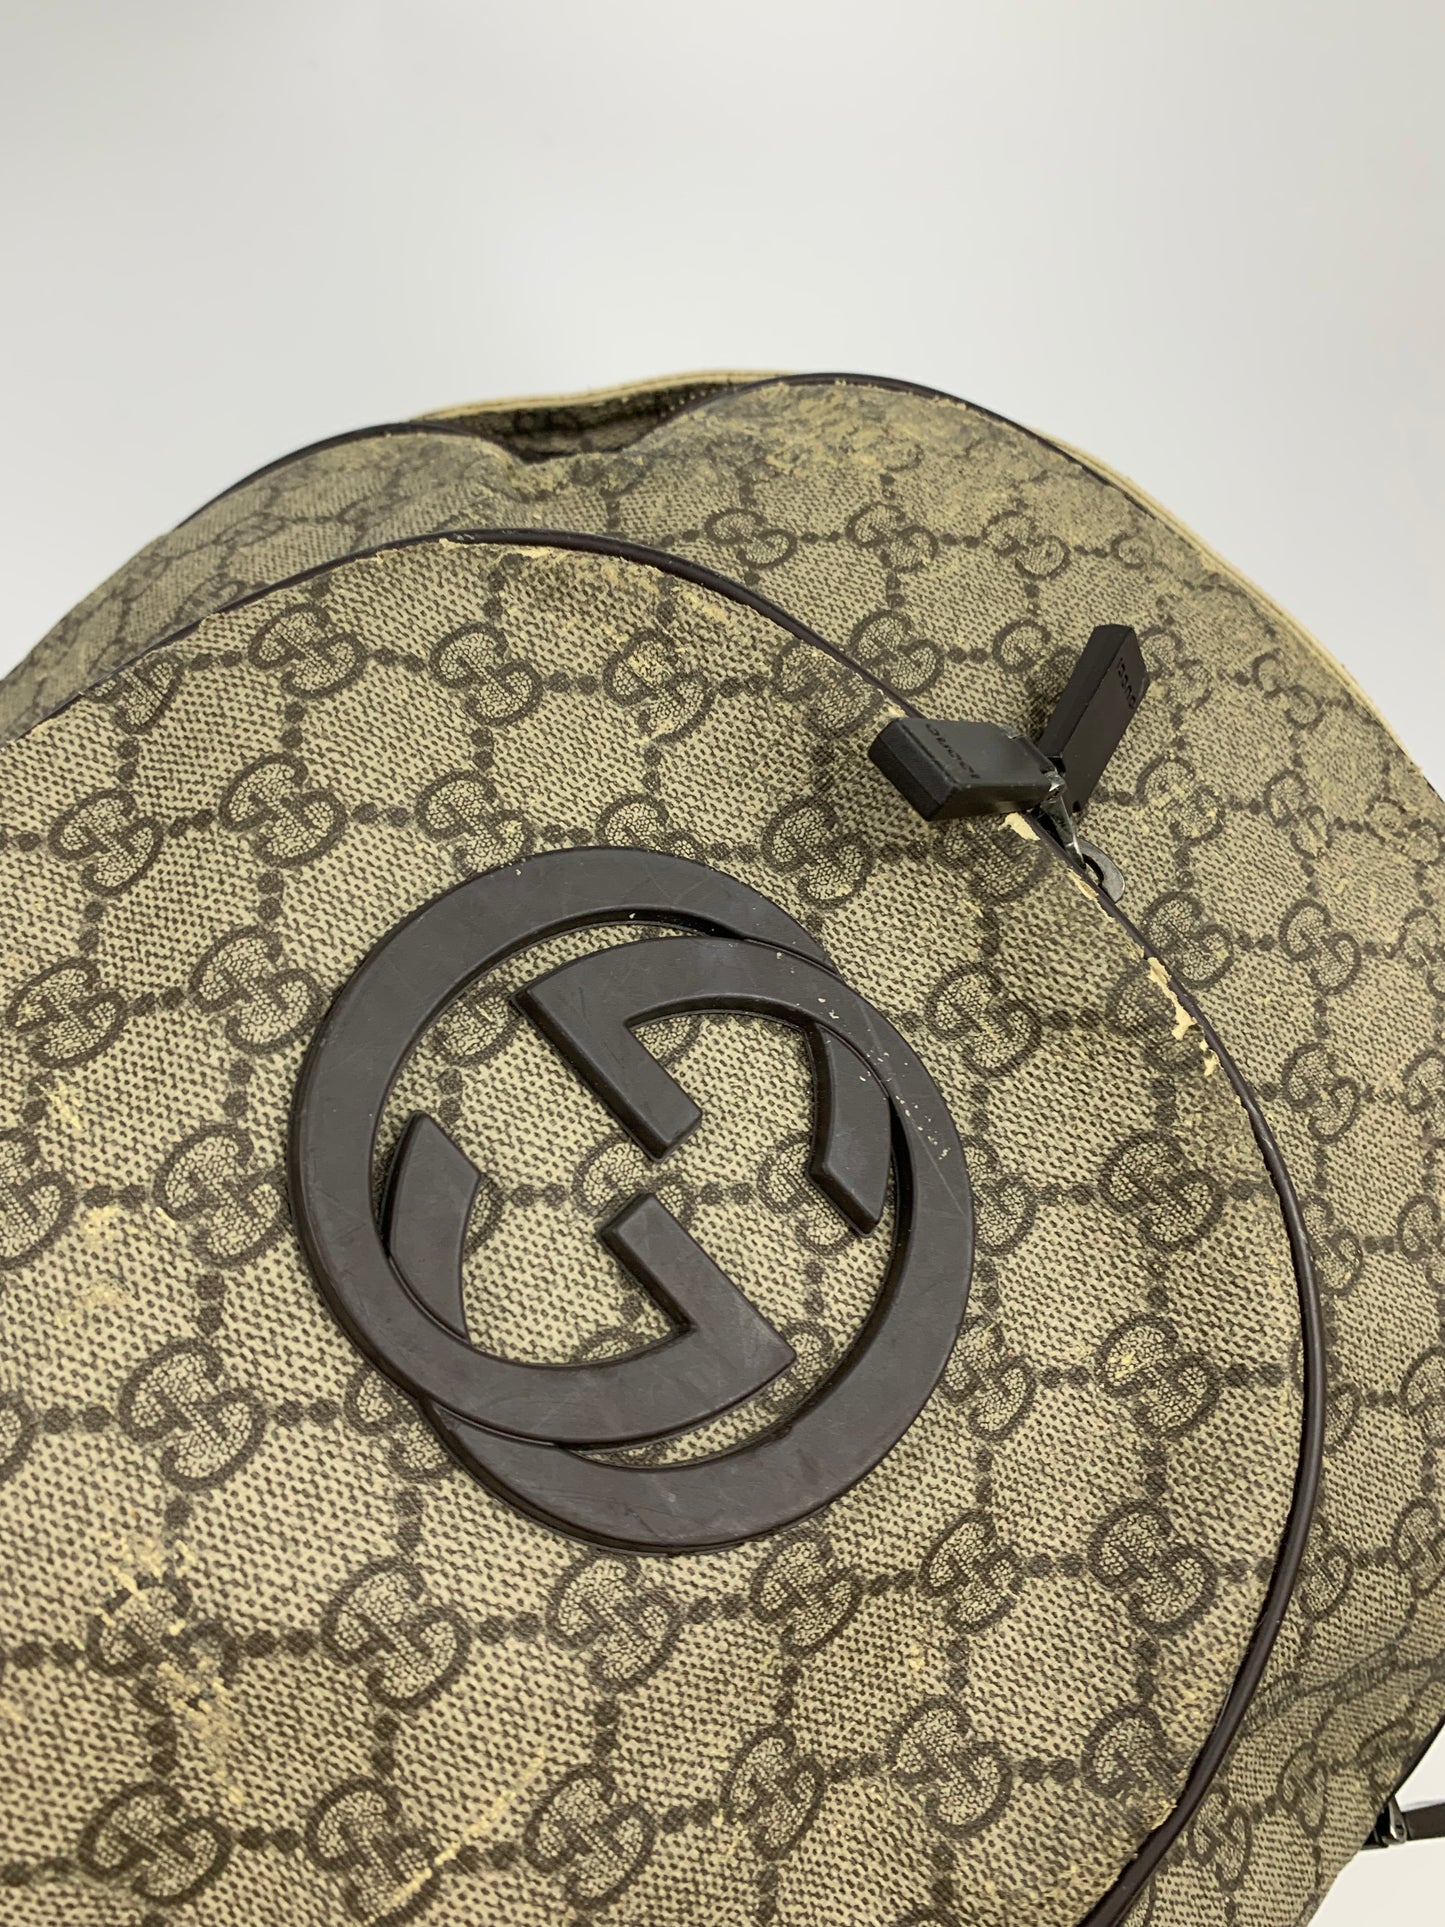 Gucci Monogram GG Leather Beige Backpack